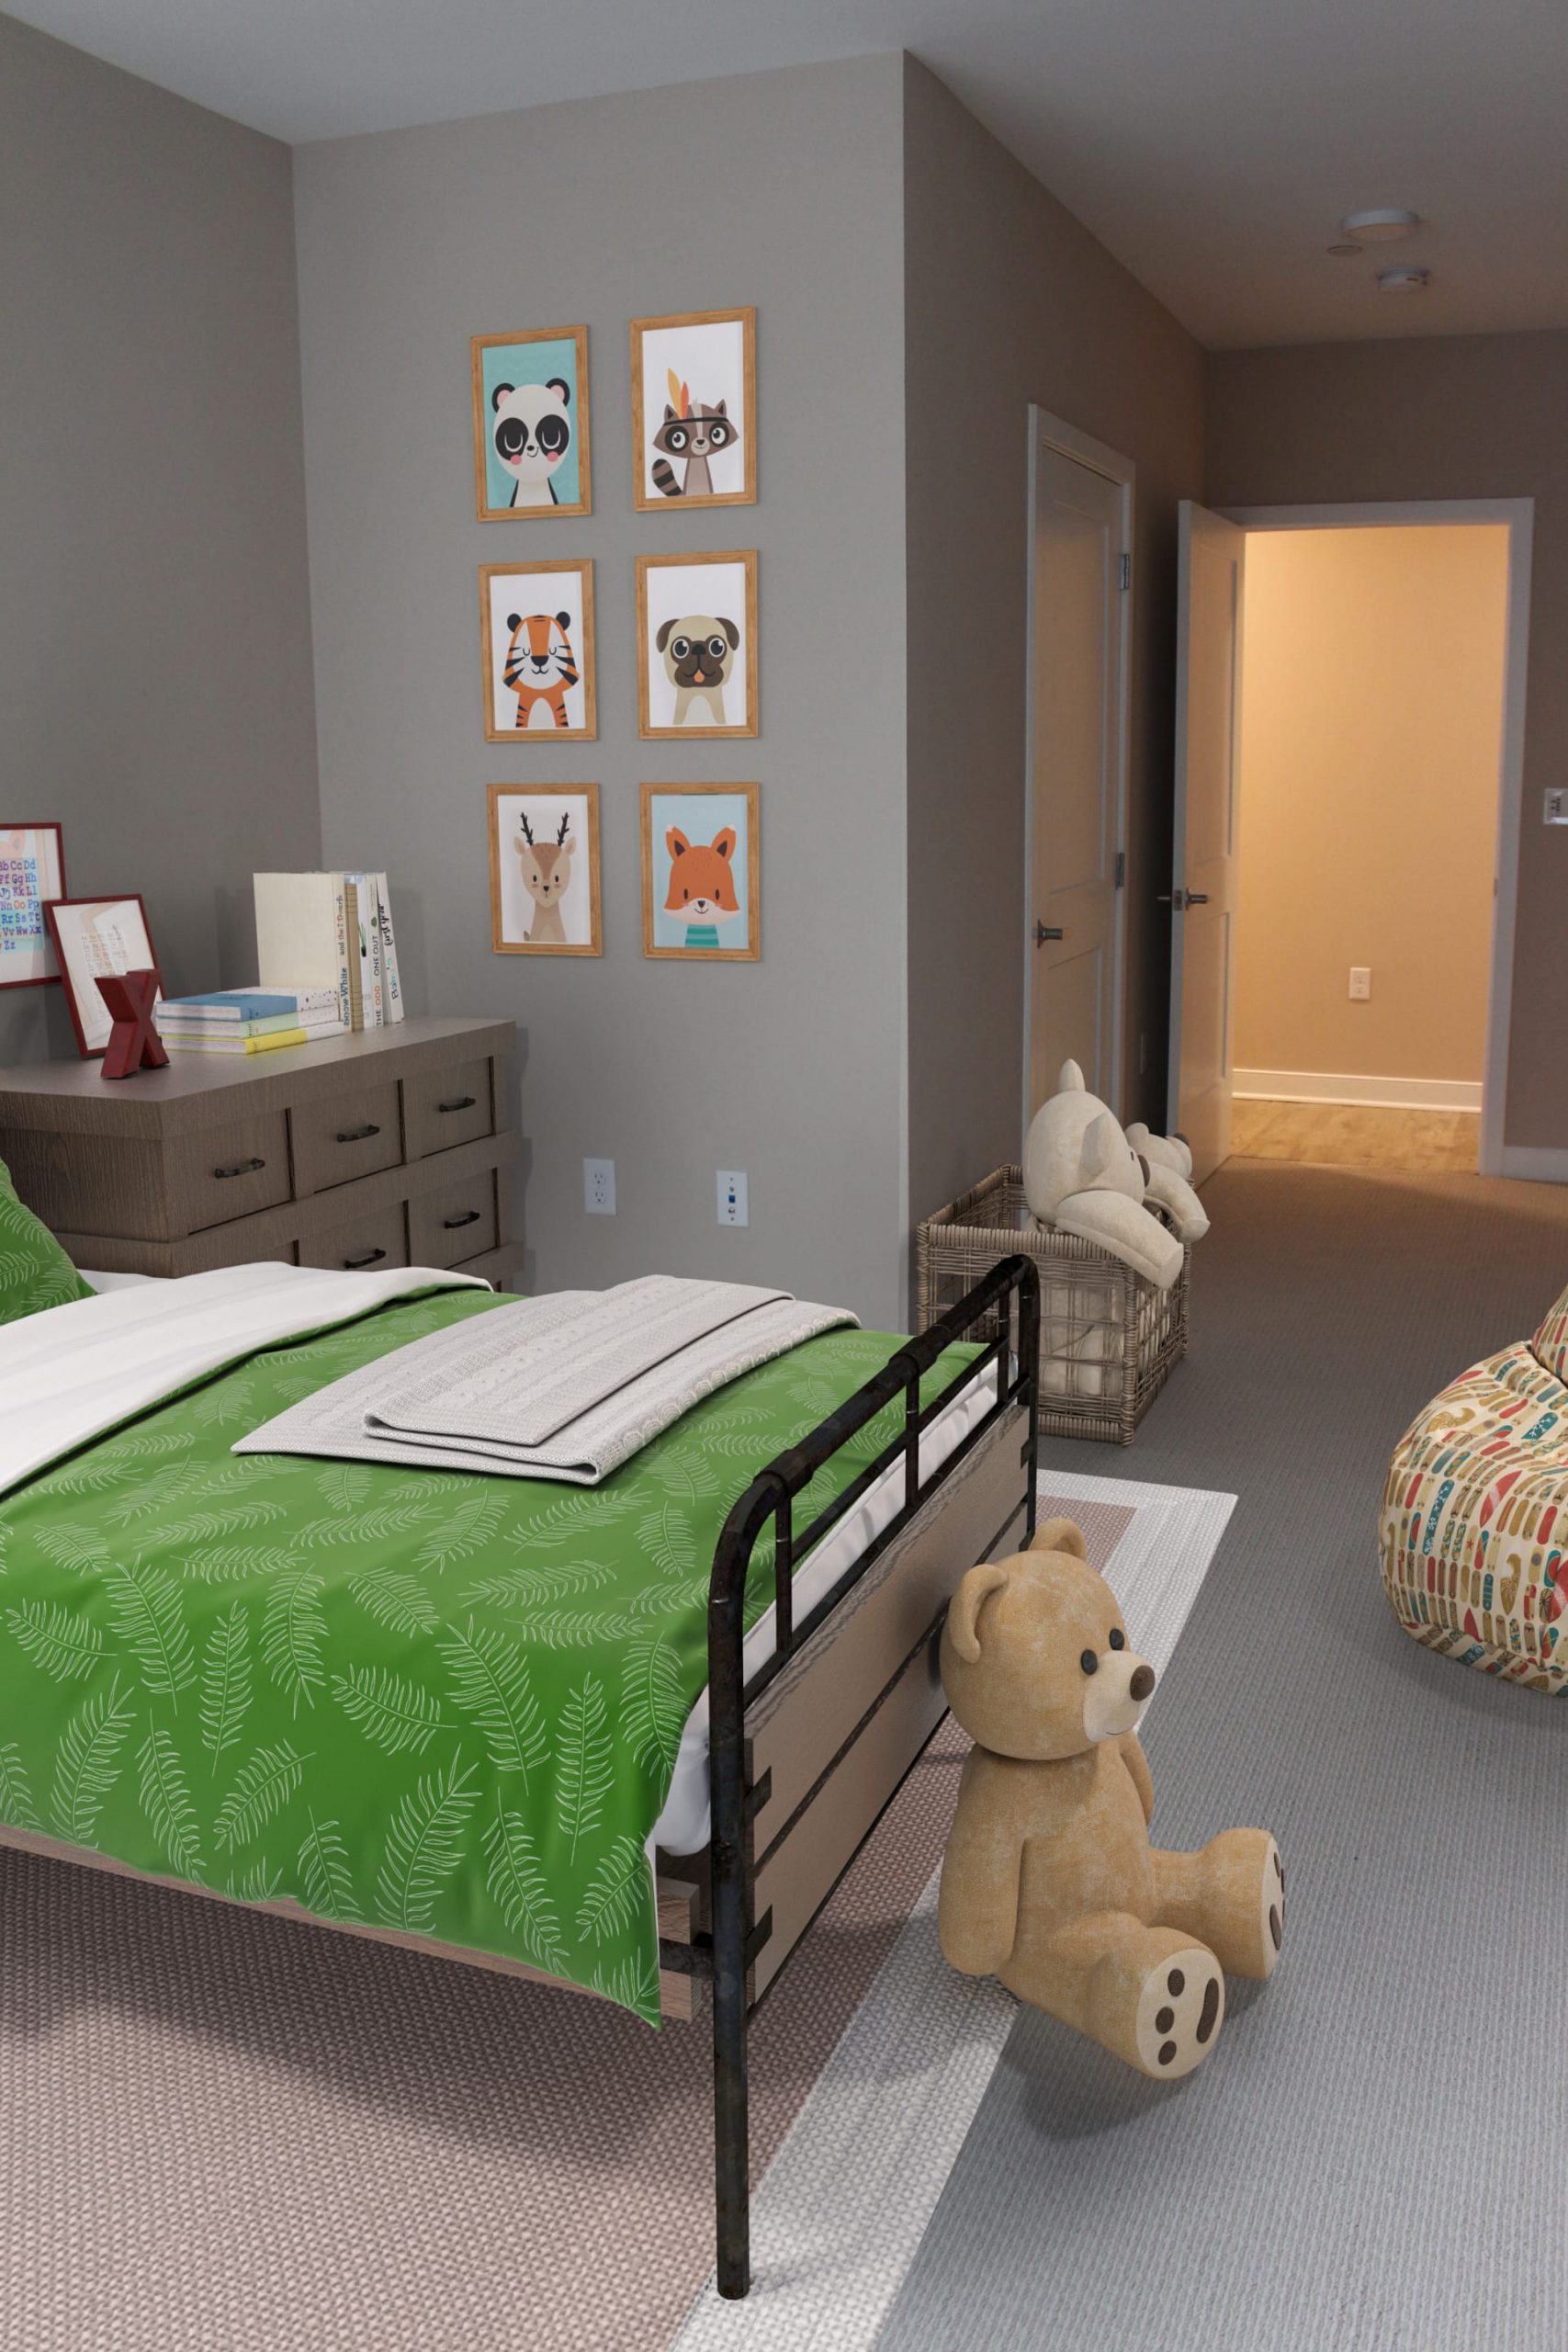 A bed in a child's room with a teddy bear.